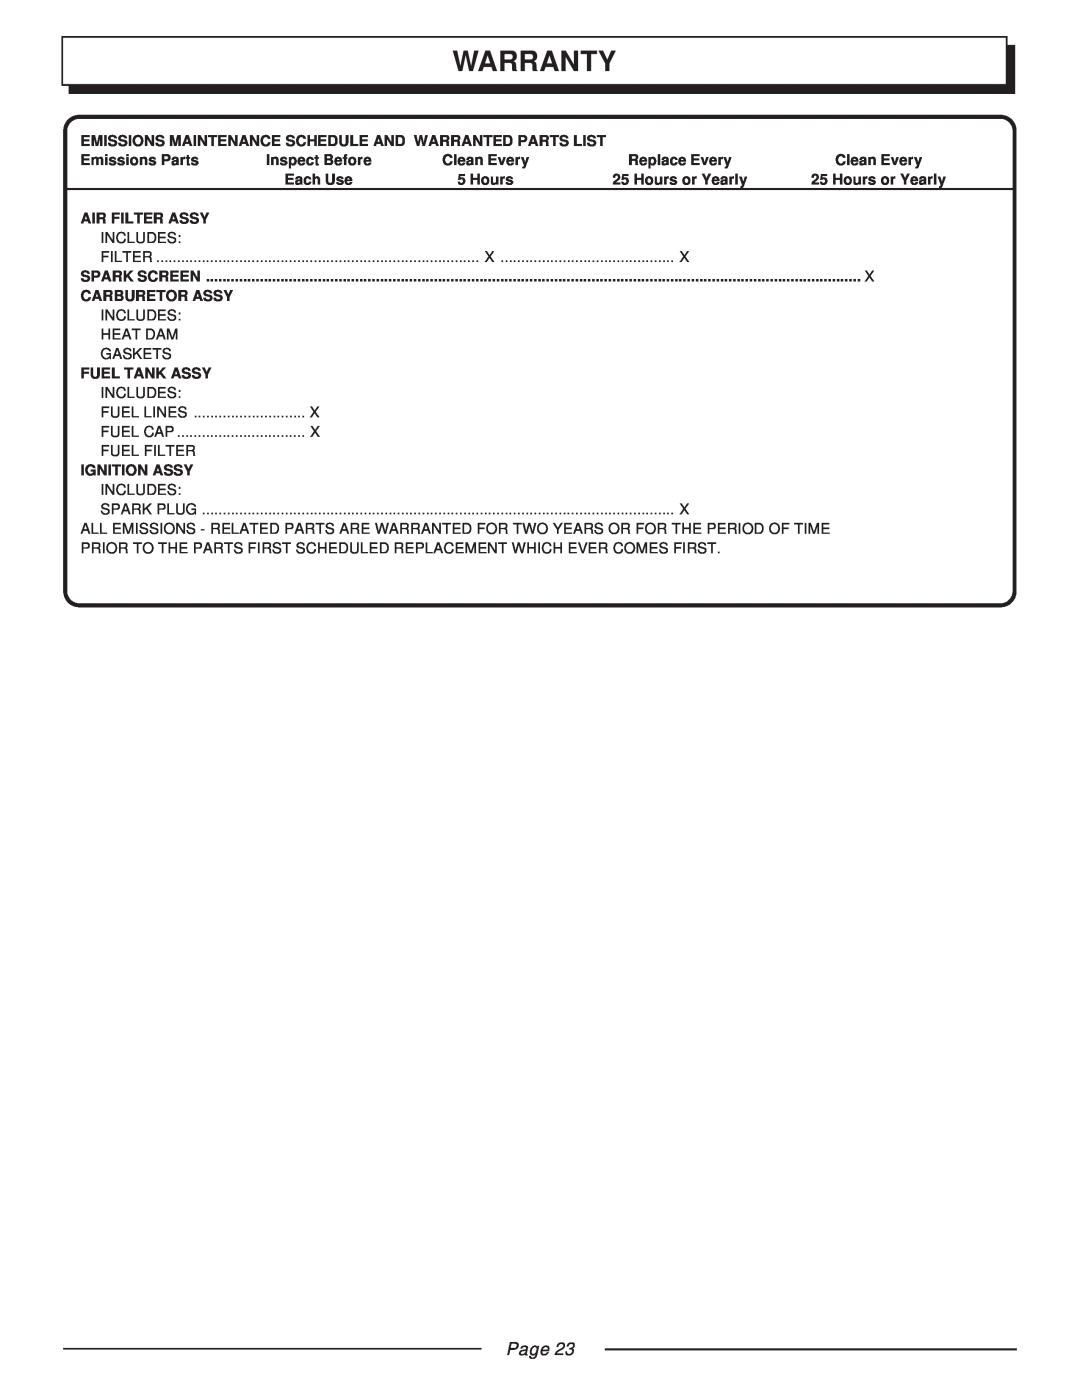 Homelite UT20003 Warranty, Page, Emissions Maintenance Schedule And Warranted Parts List, Emissions Parts, Clean Every 